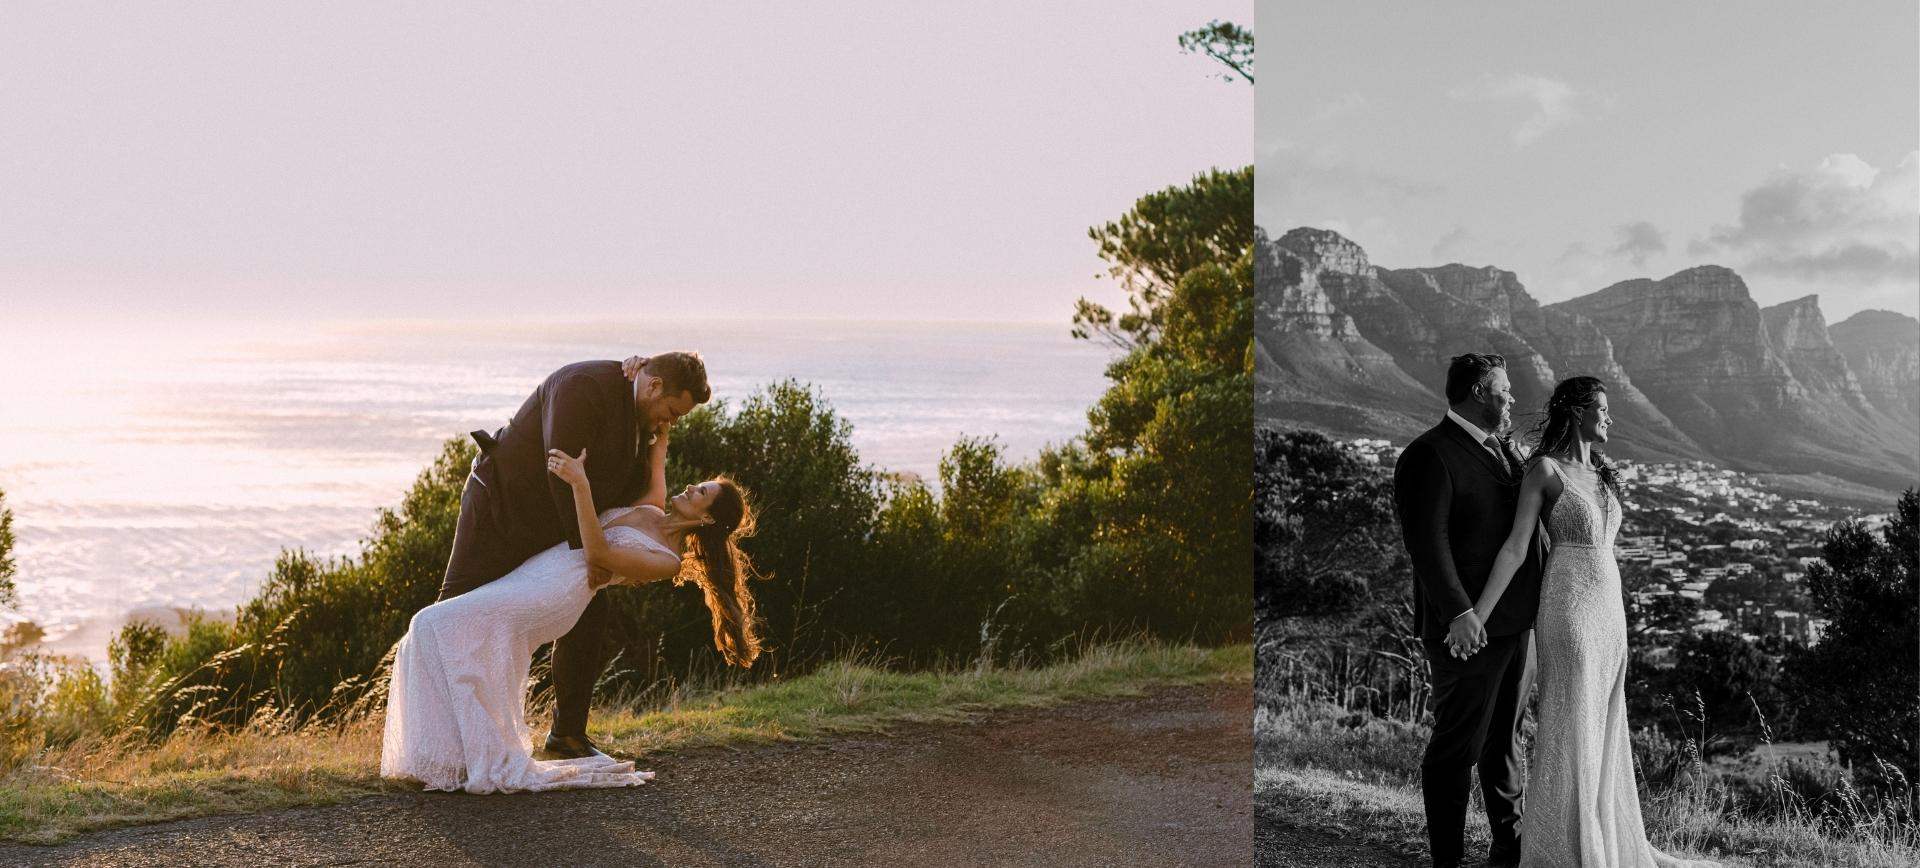 elopement packages cape town - south africa